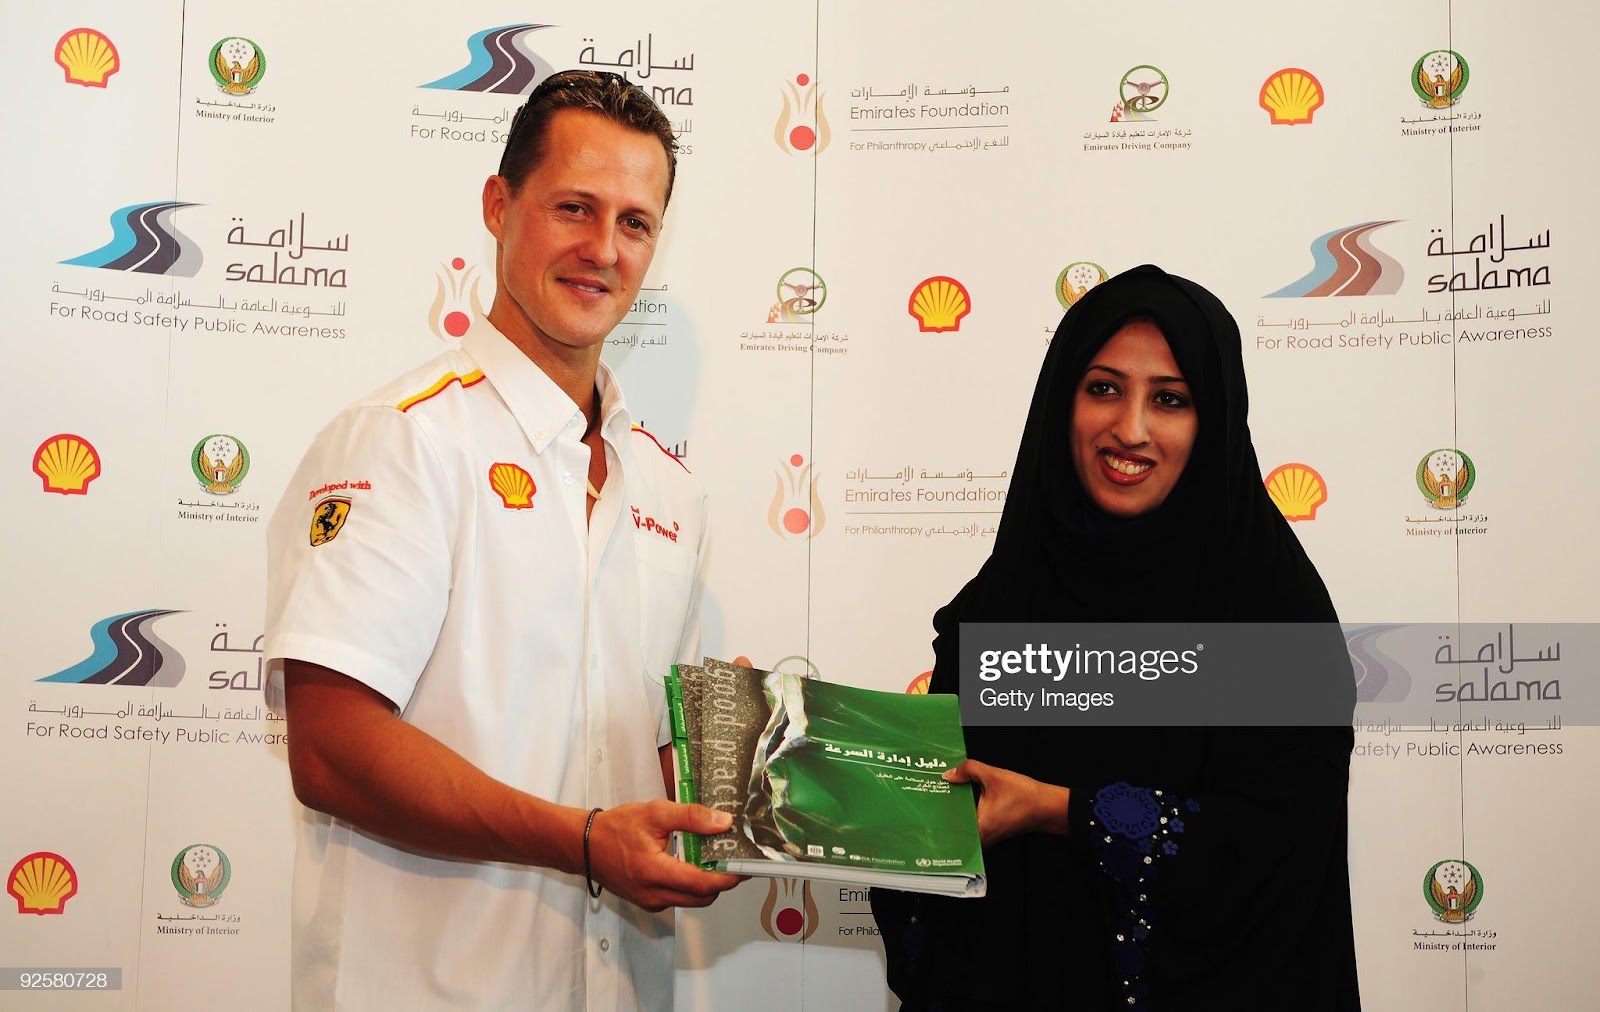 Former Ferrari F1 World Champion attends a joint event hosted in conjunction by Salama and Shell to promote road safety in the U.A.E. at the Yas Hotel before qualifying for the Abu Dhabi F1 Grand Prix at the Yas Marina Circuit on October 31, 2009 in Abu Dhabi, United Arab Emirates